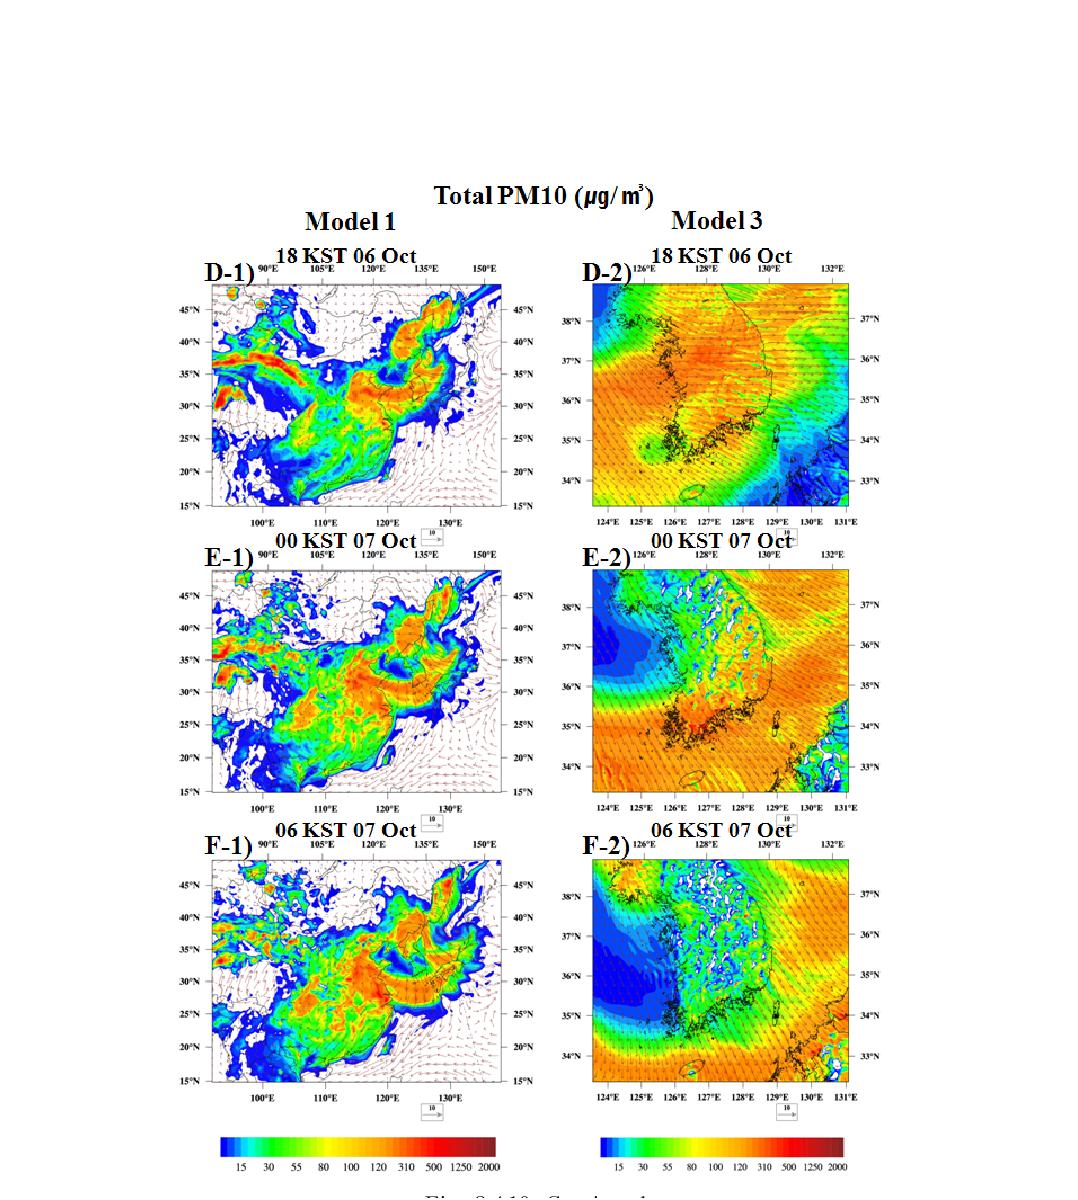 Horizontal distributions of near surface total PM10 concentration (µg m-3) simulated by Model 1 (left panels) and Model 3 (right panels) at (a) 0000 KST 06, (b) 0600 KST 06, (c) 12 KST 06, (d) 18 KST 06, (e) 00 KST 07, (f) 06 KST 07 October 2011.